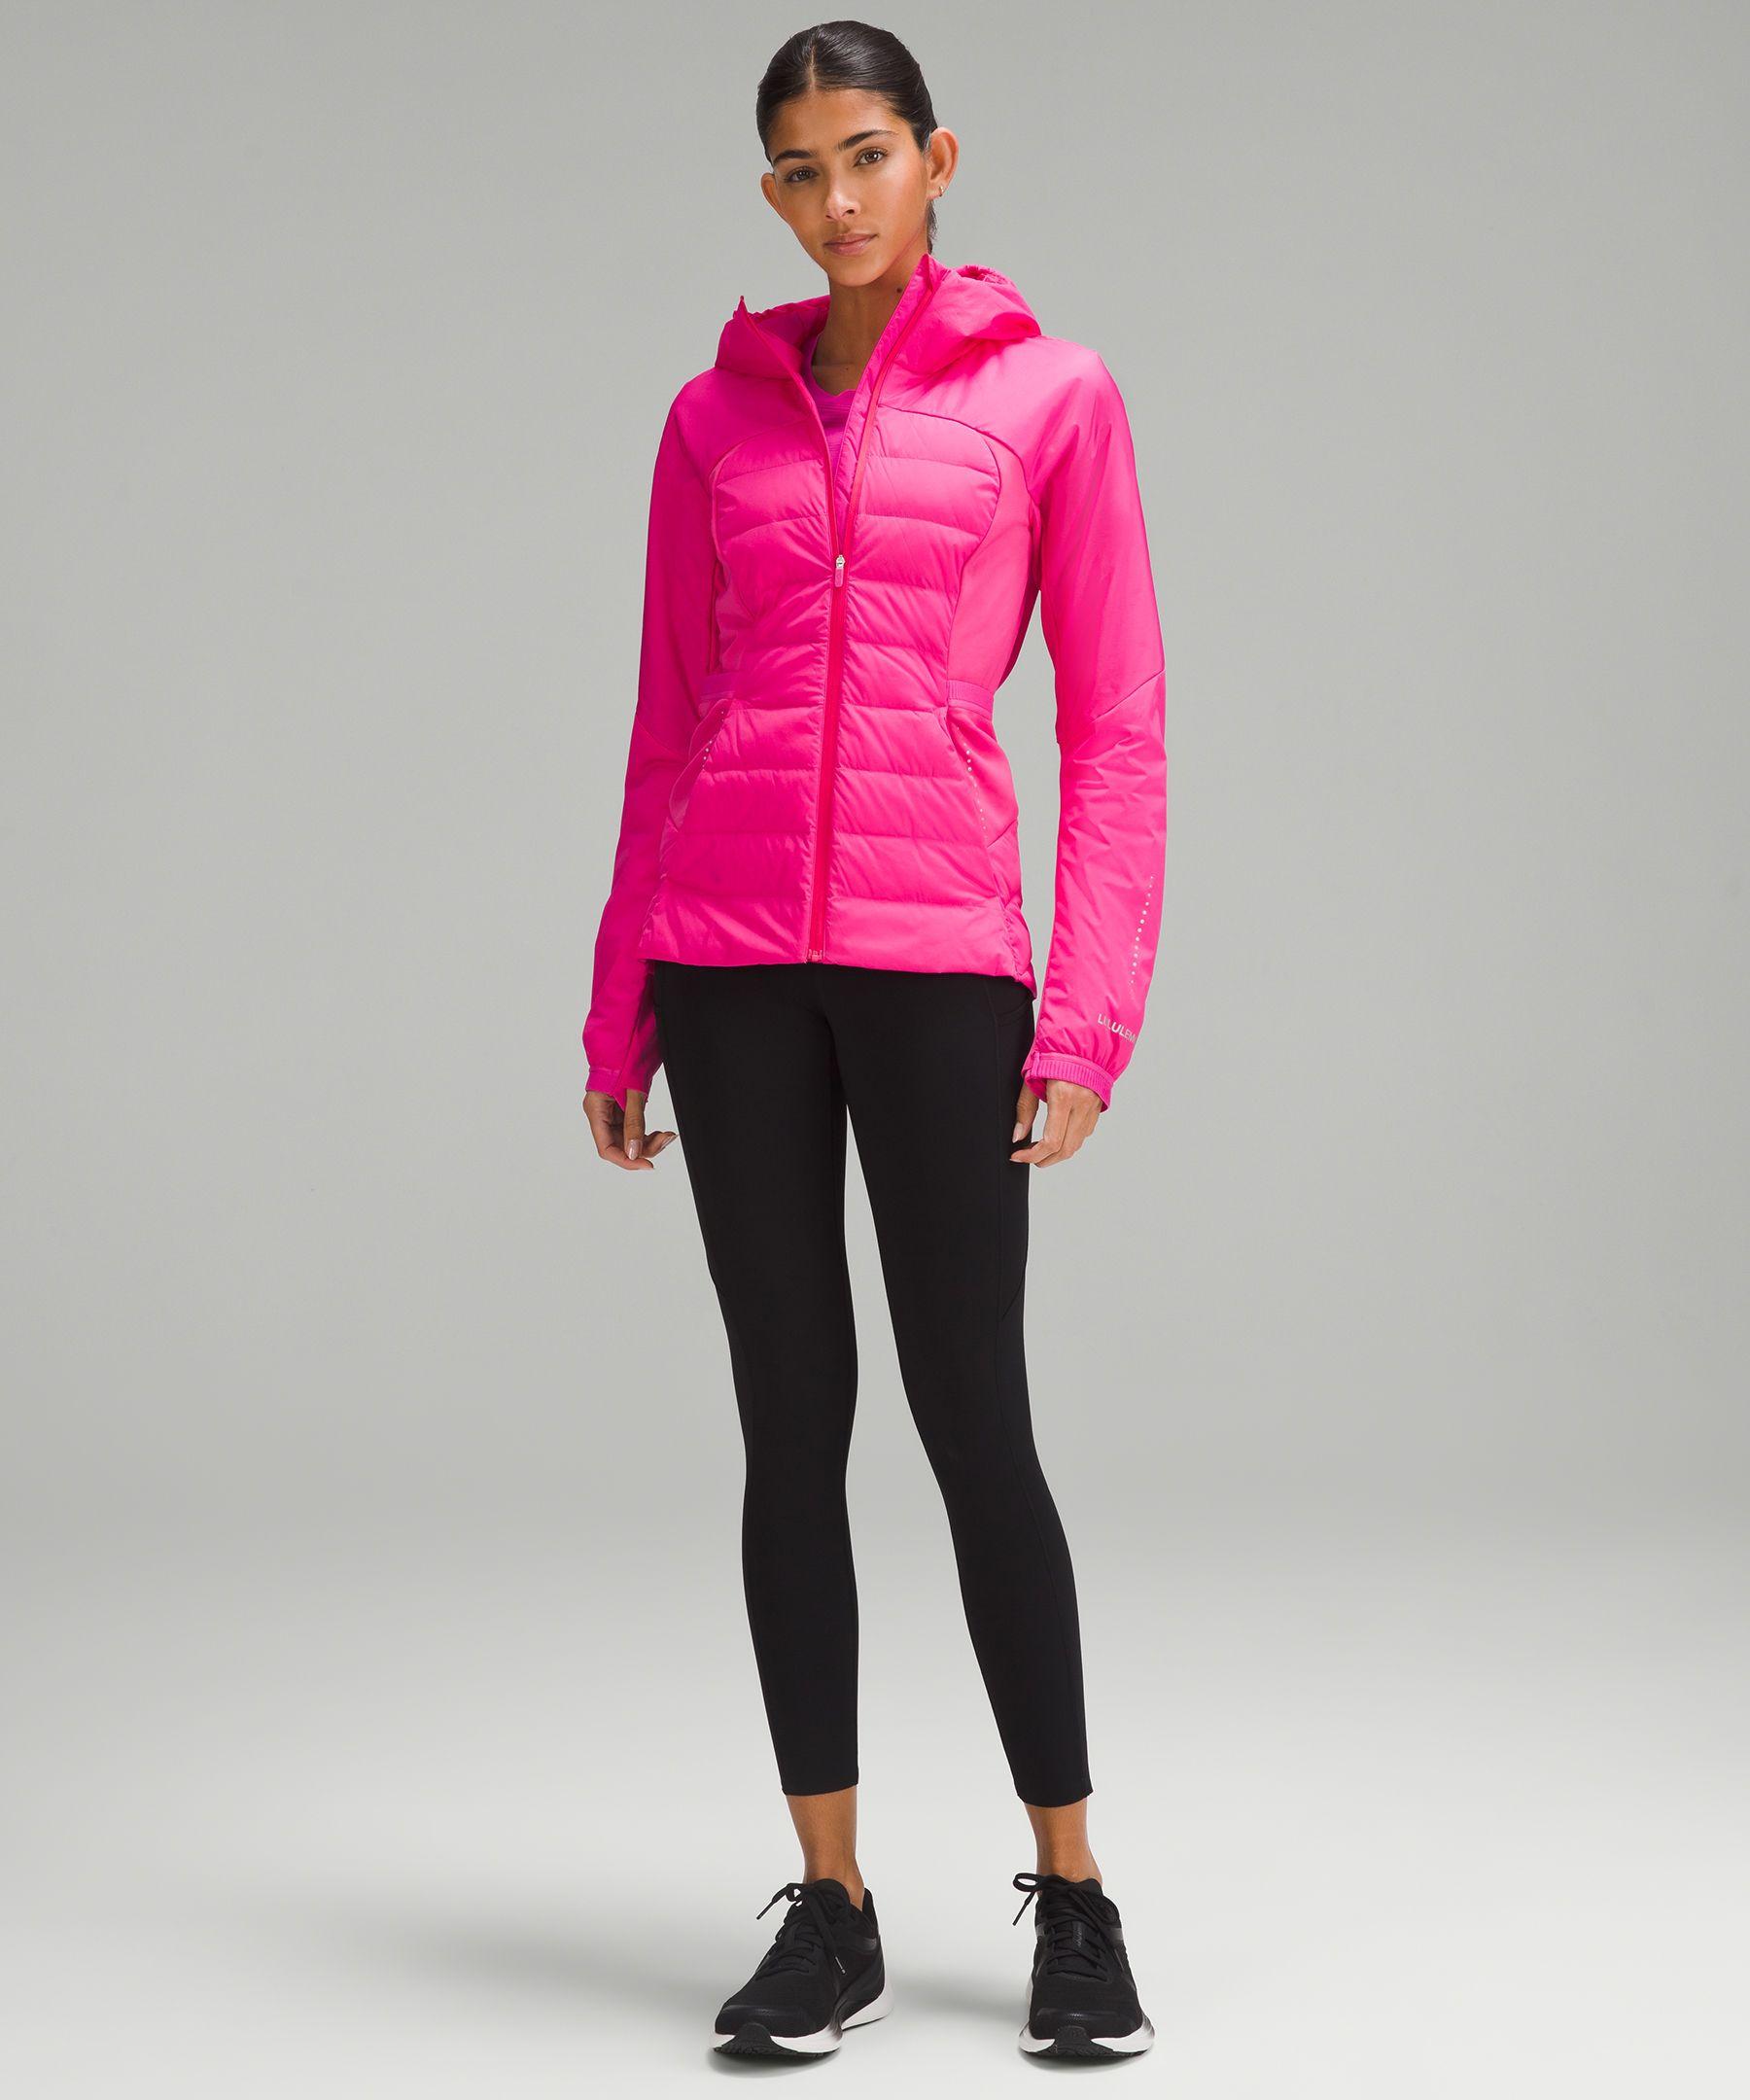 Lululemon athletica Down for It All Hoodie, Men's Coats & Jackets